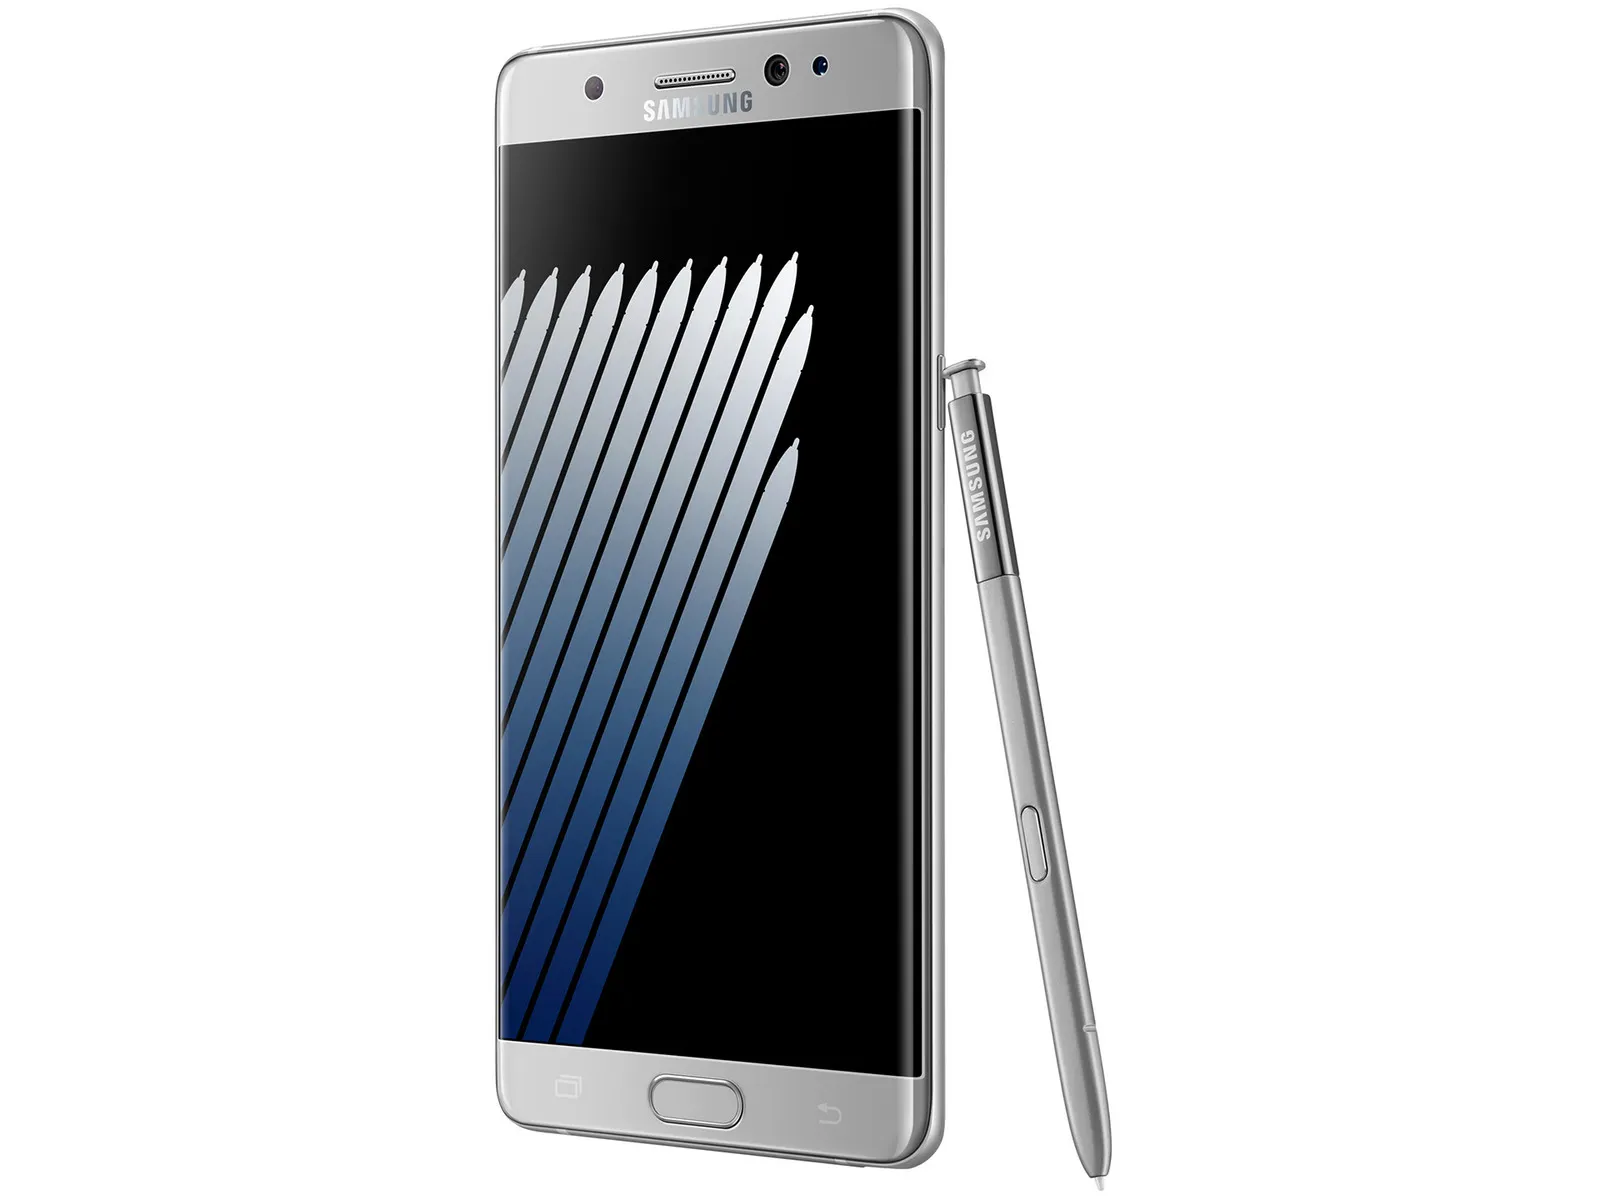 What to do if the Black Screen of Death appears on your Samsung Galaxy Note7 [Troubleshooting Guide]